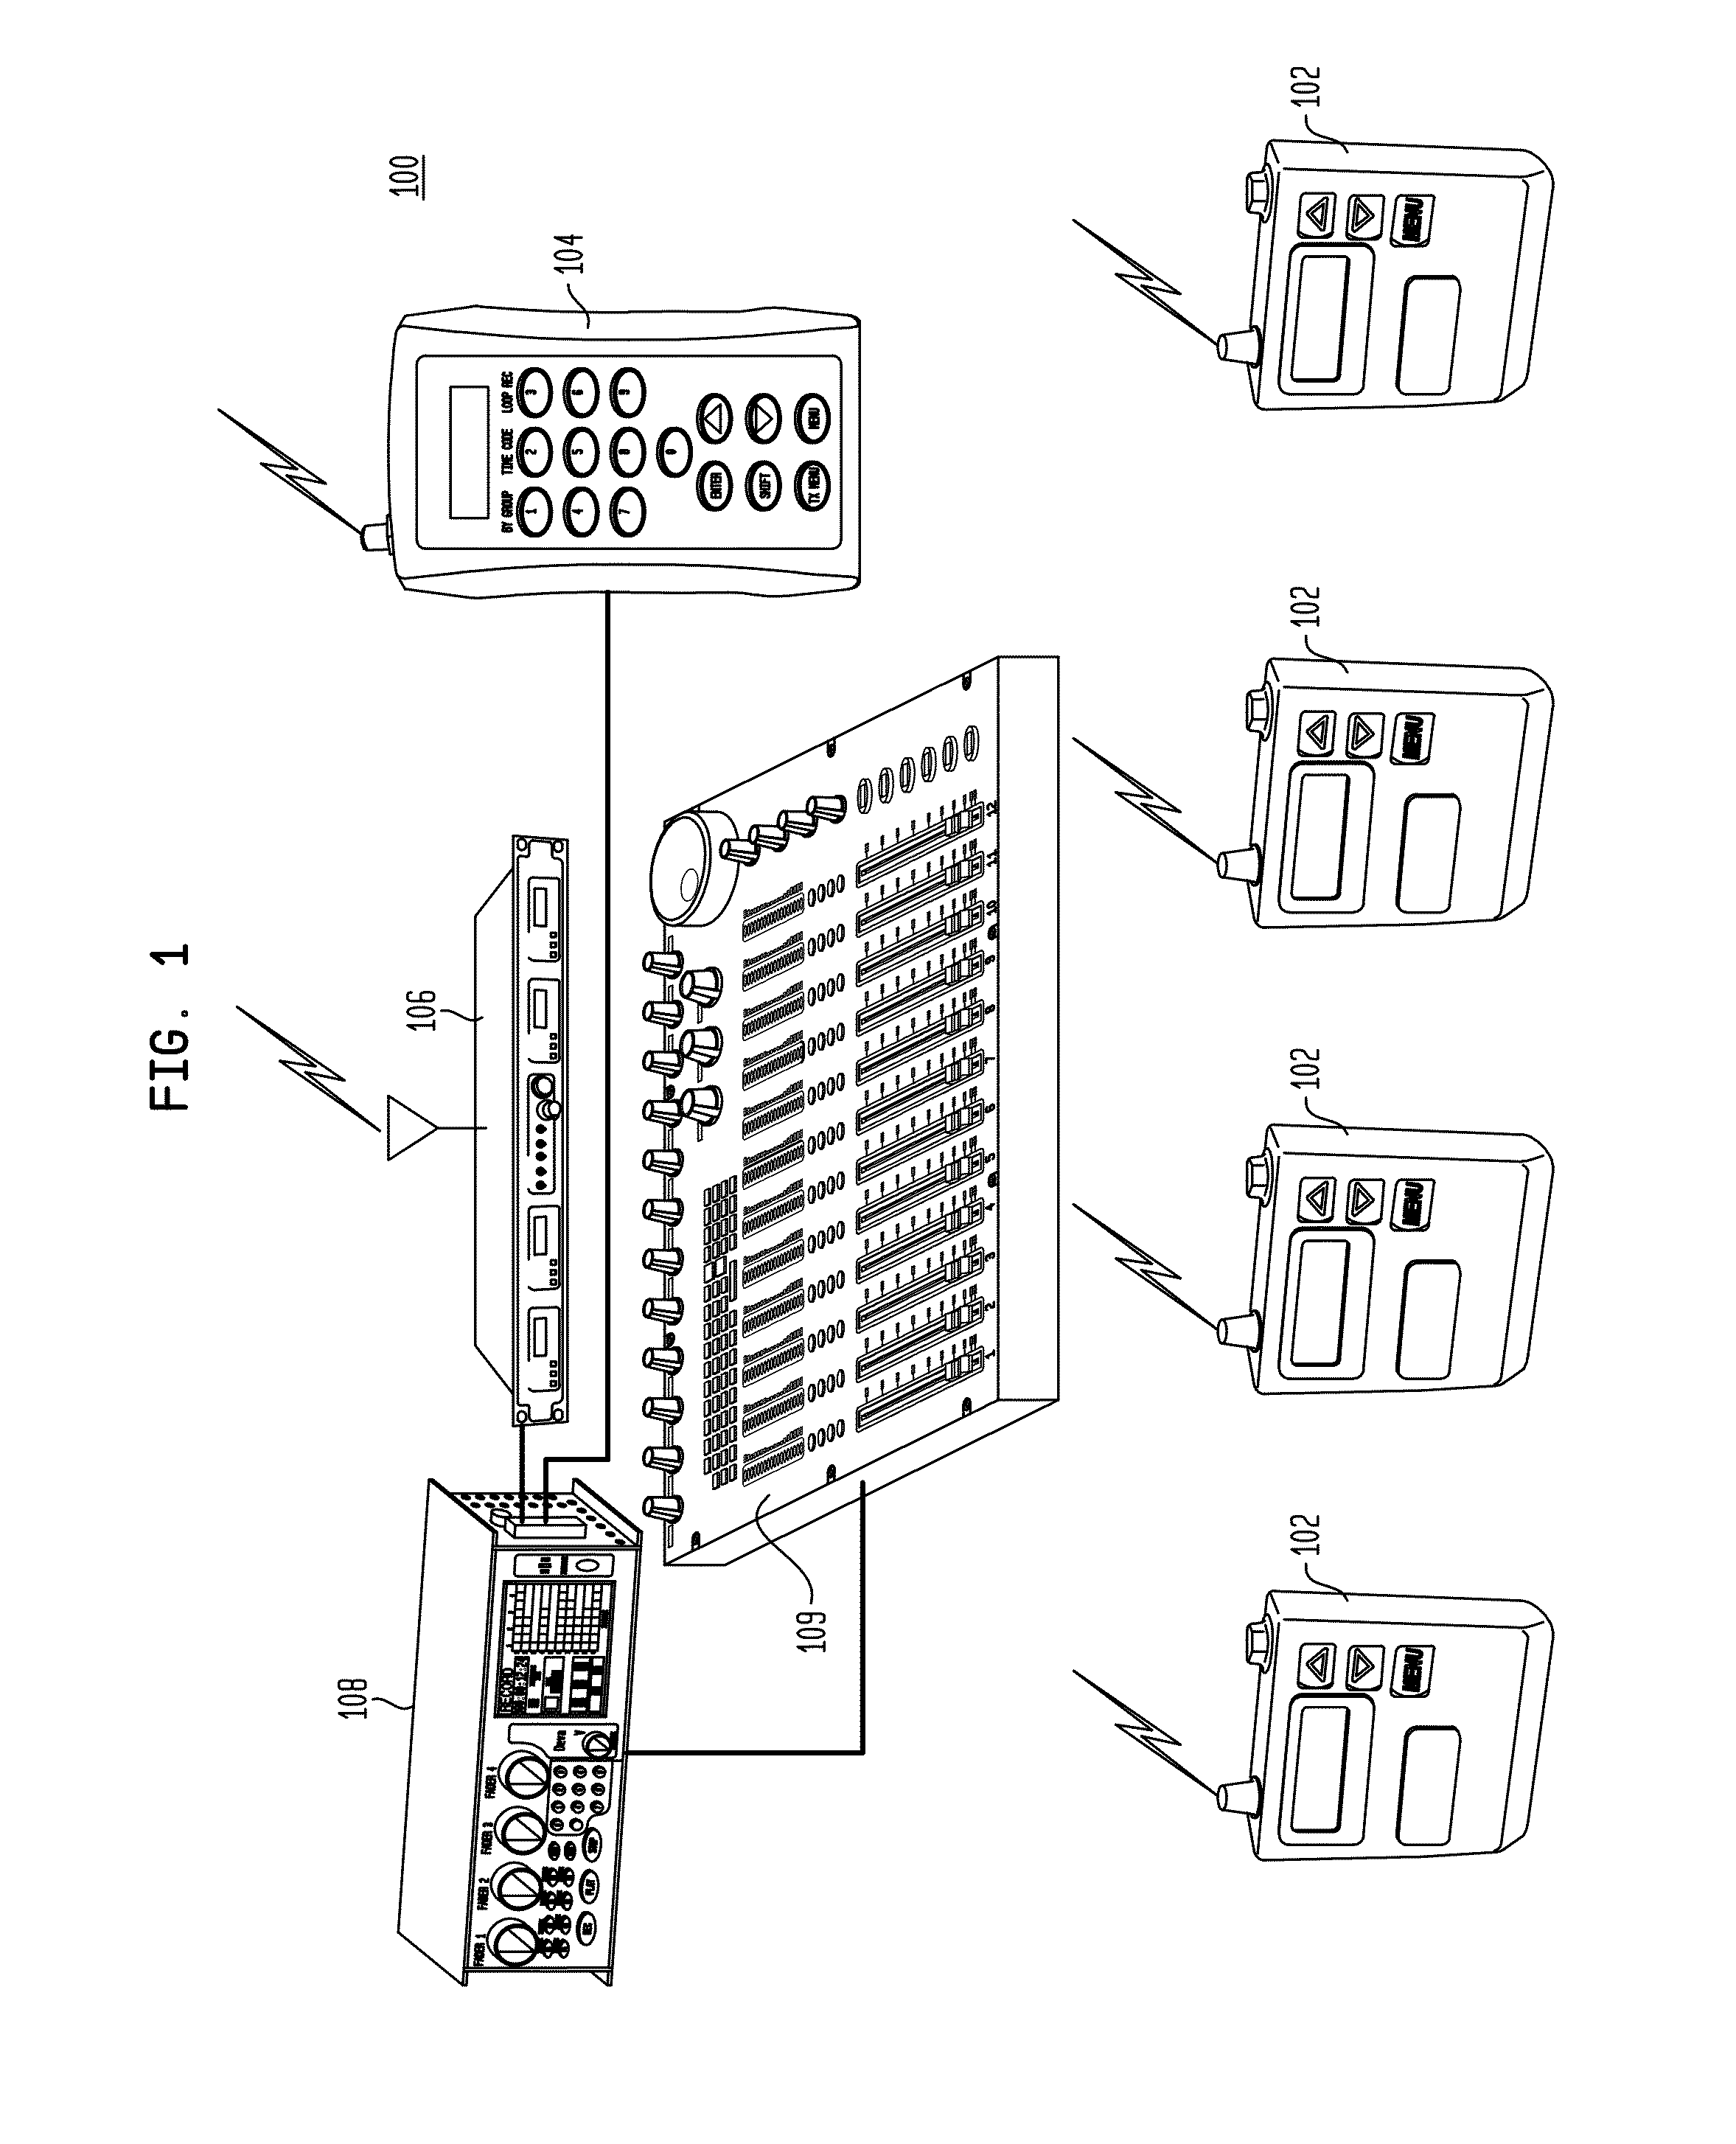 Systems and methods for remotely controlling local audio devices in a virtual wireless multitrack recording system